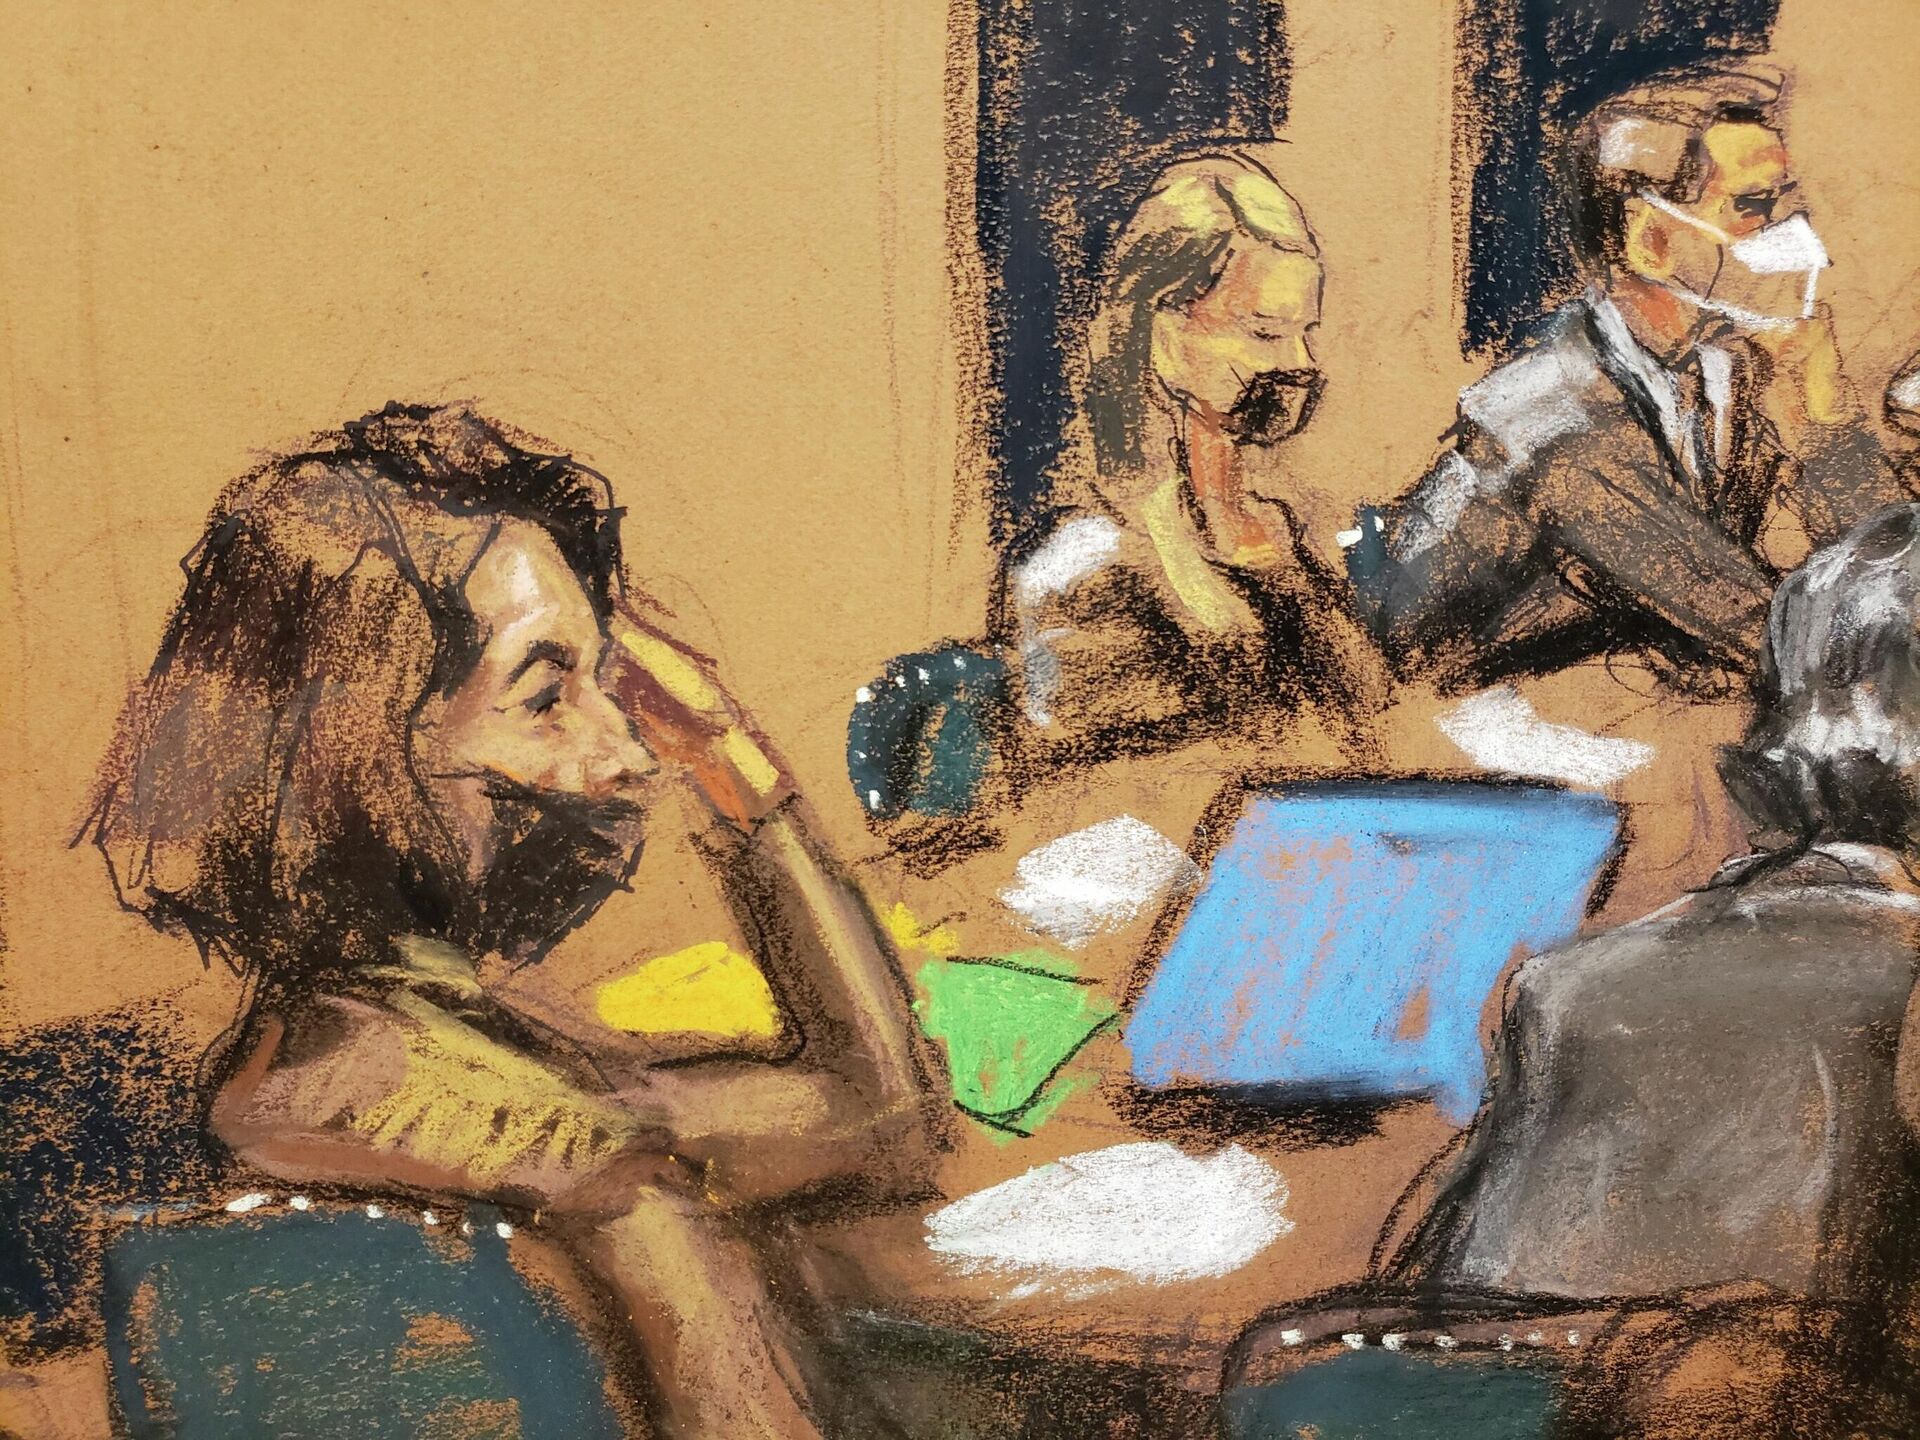 Ghislaine Maxwell sits with her defense lawyers during the trial of Maxwell, the Jeffrey Epstein associate accused of sex trafficking, in a courtroom sketch in New York City, U.S., December 10, 2021 - Sputnik International, 1920, 30.12.2021